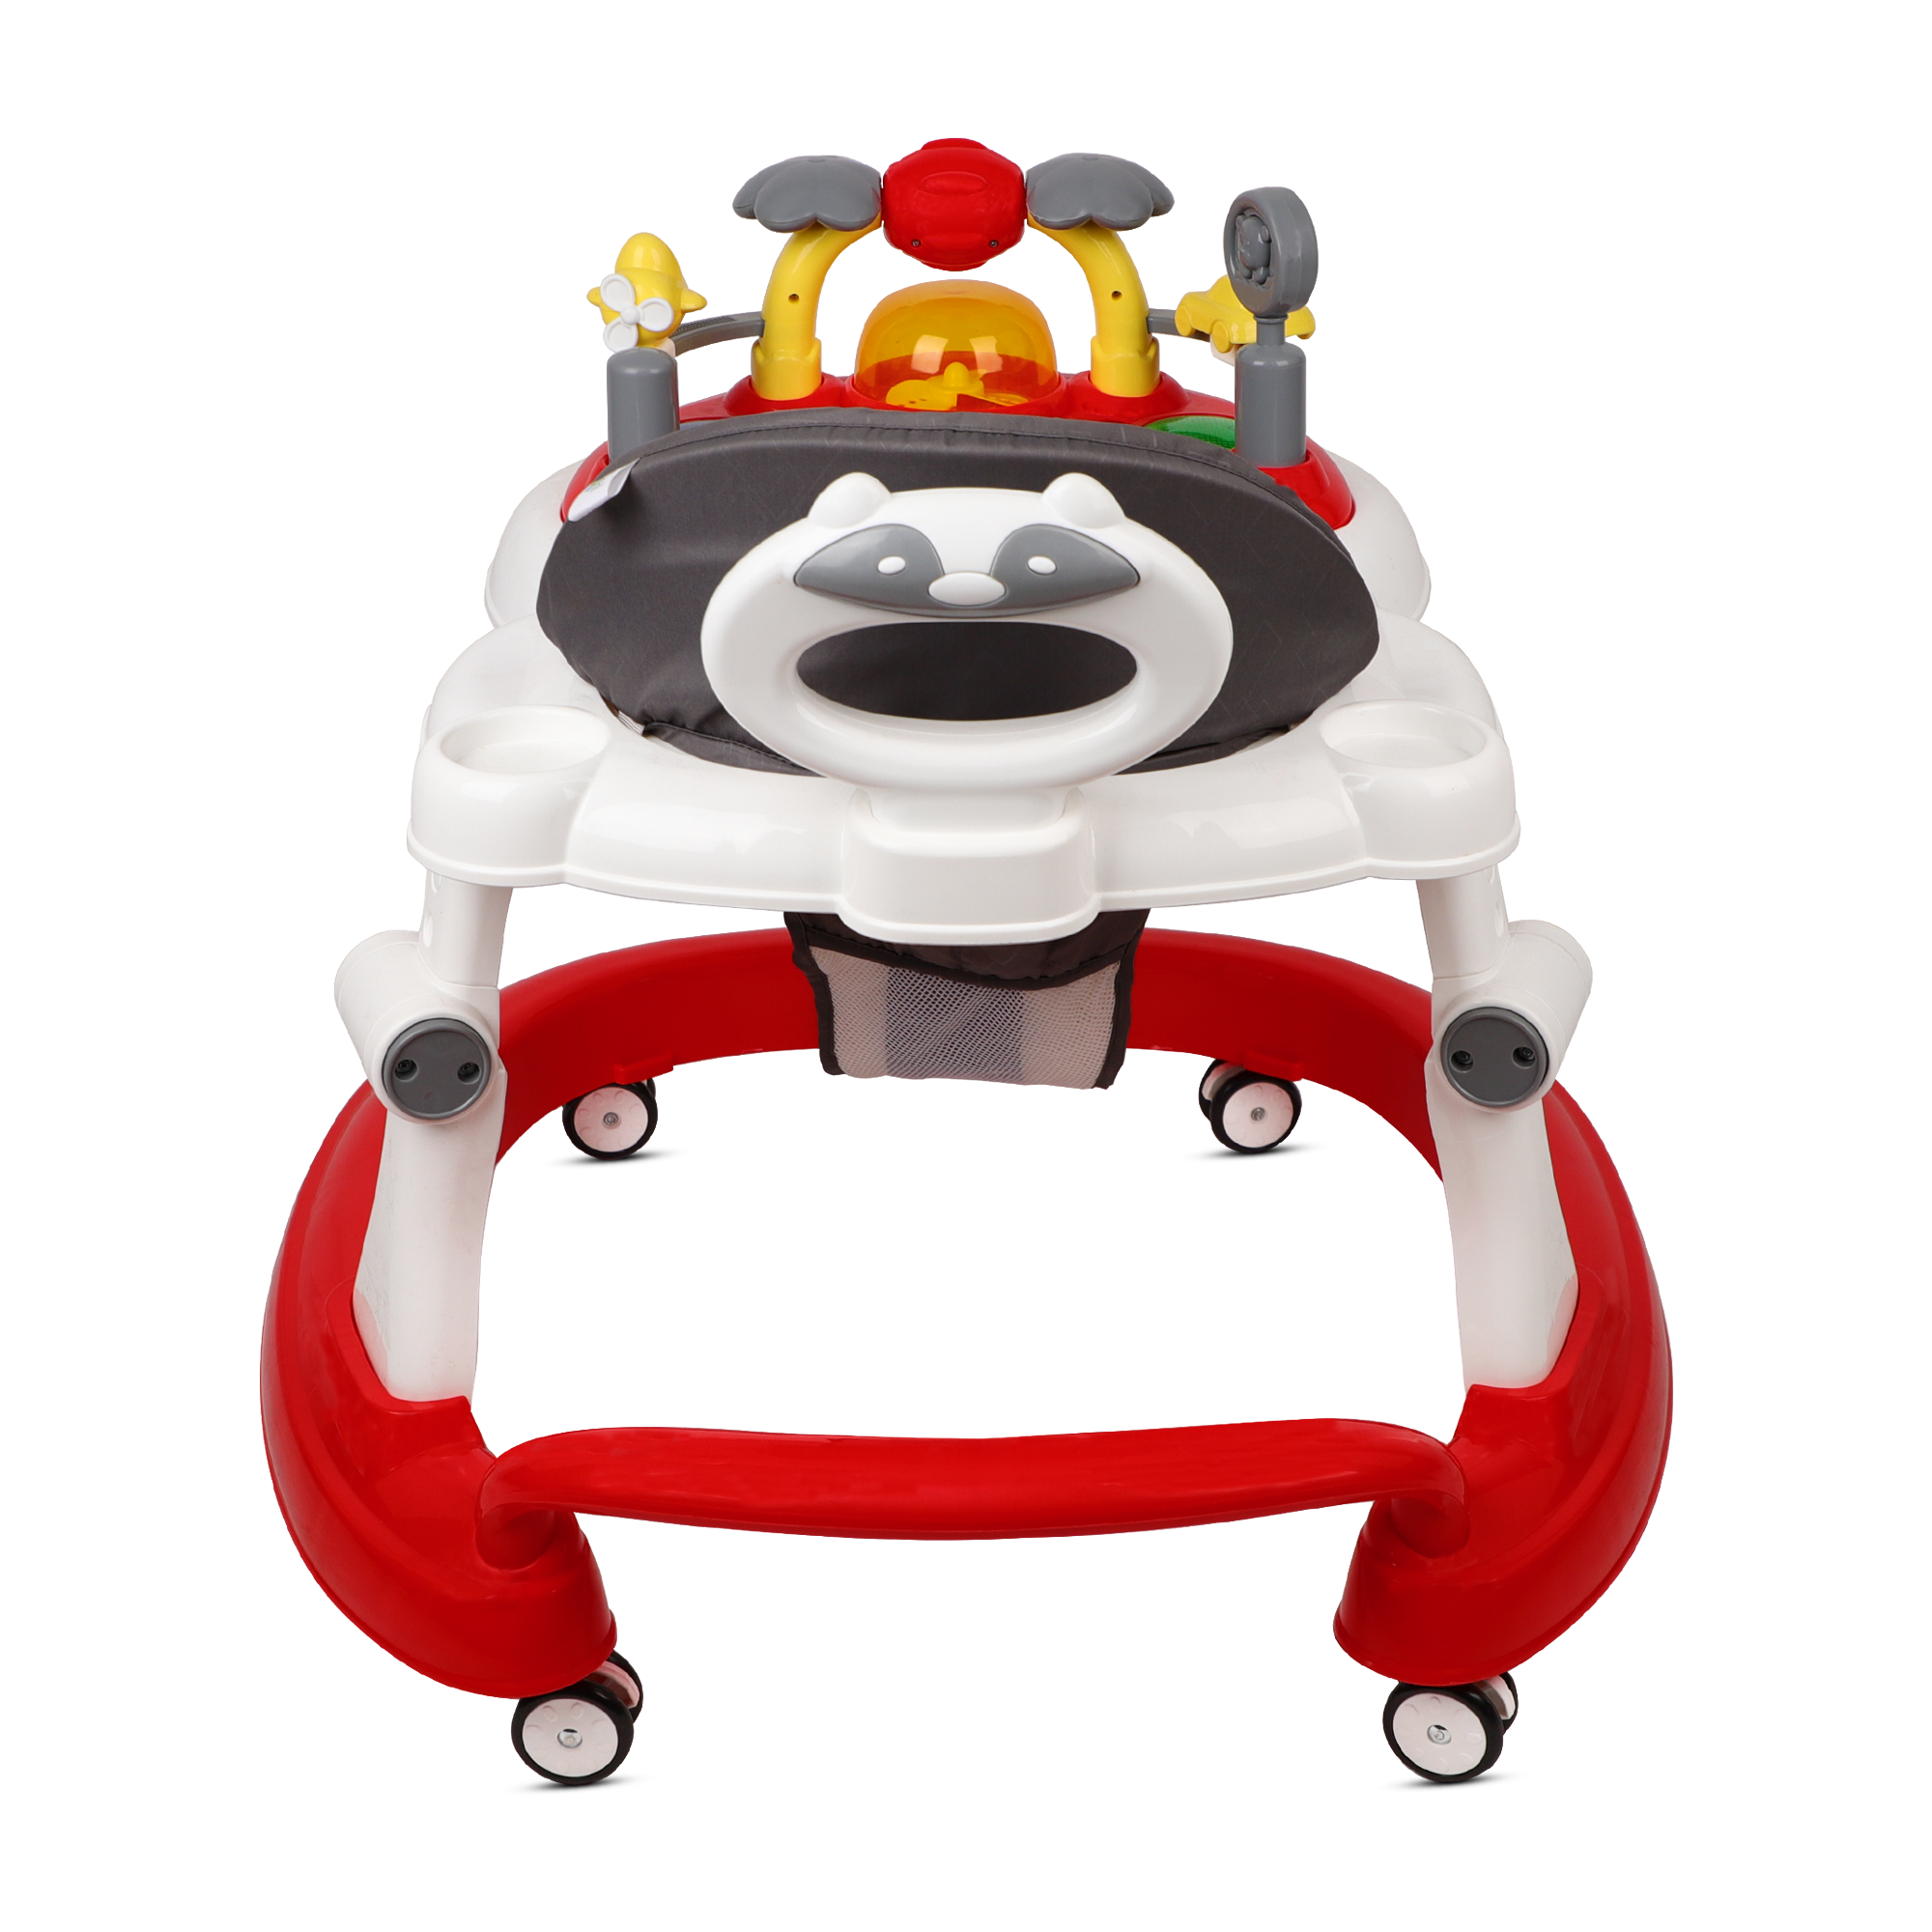 RED BABY WALKER WITH PUSH HANDLE